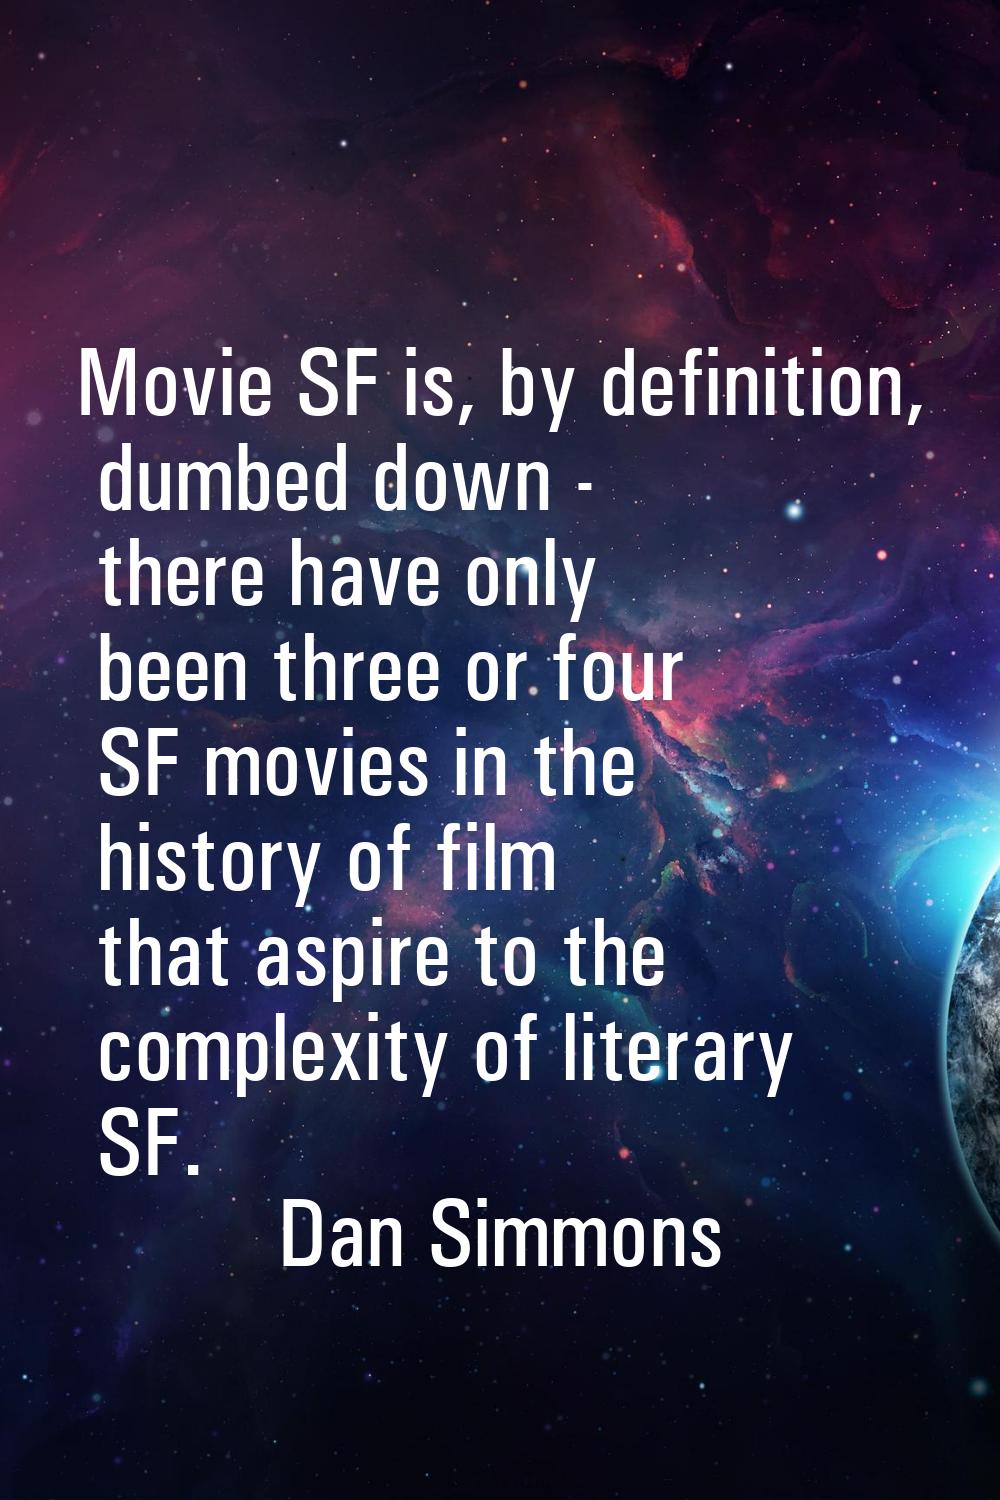 Movie SF is, by definition, dumbed down - there have only been three or four SF movies in the histo